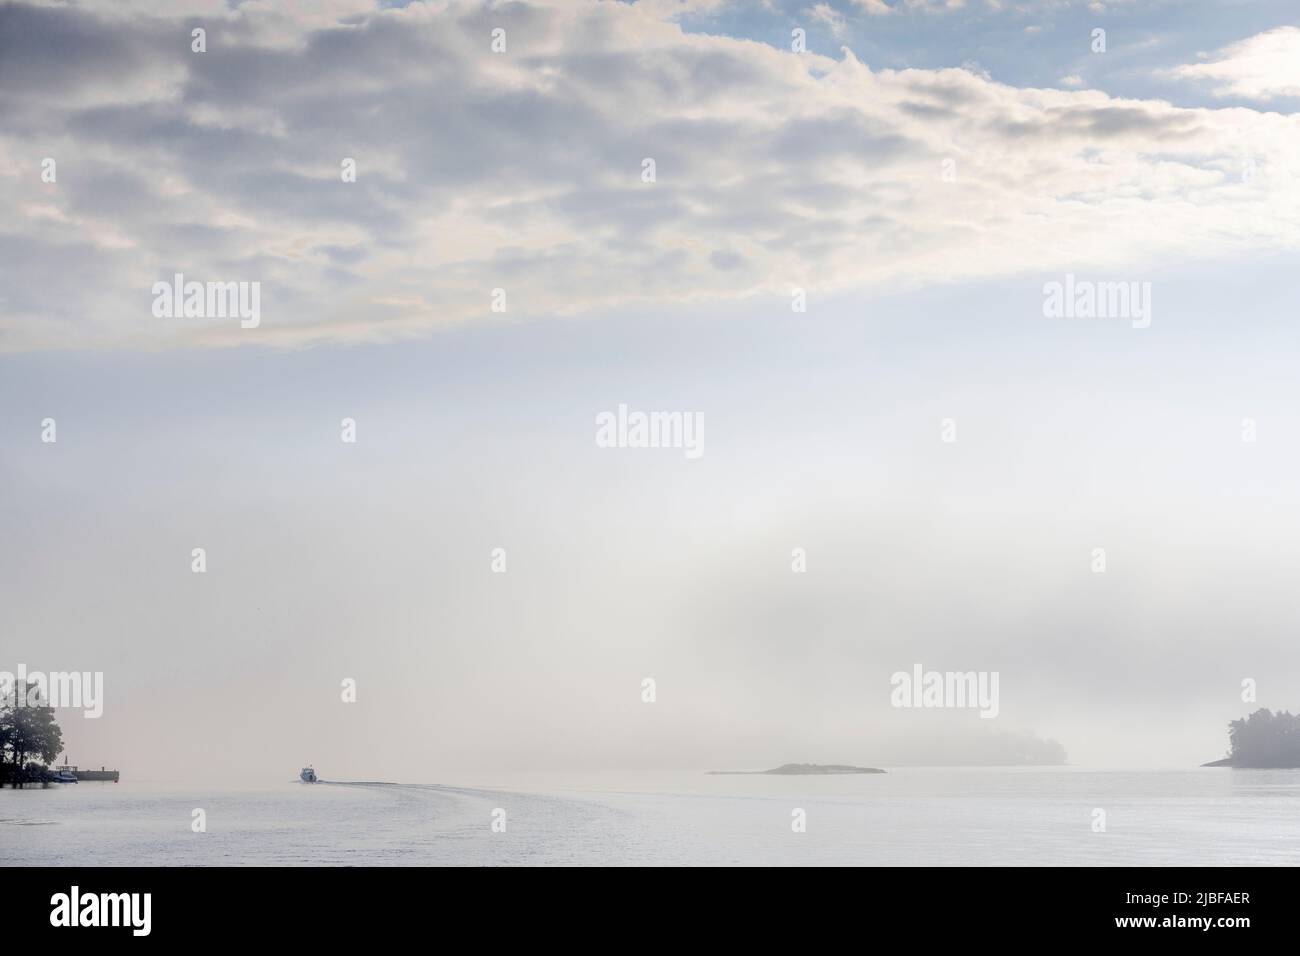 Boat on Baltic Sea under clouds in Lidingo, Sweden Stock Photo